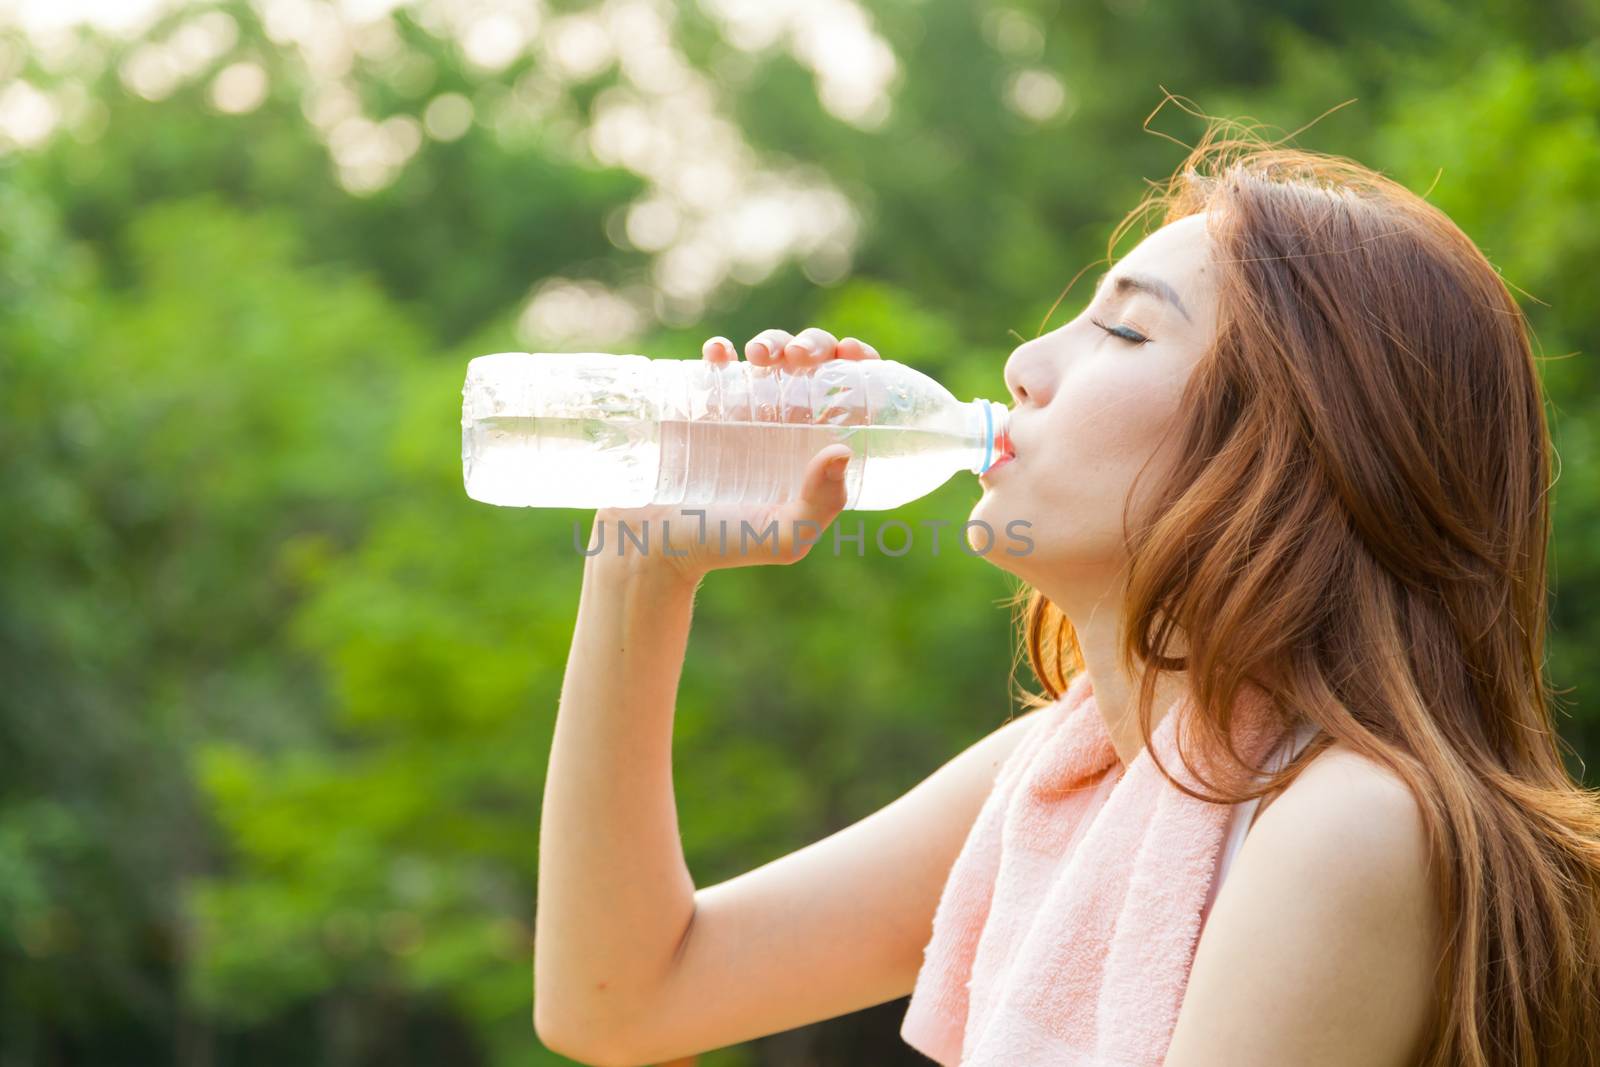 Woman sitting tired and drinking water after exercise. Within the lawn of park.